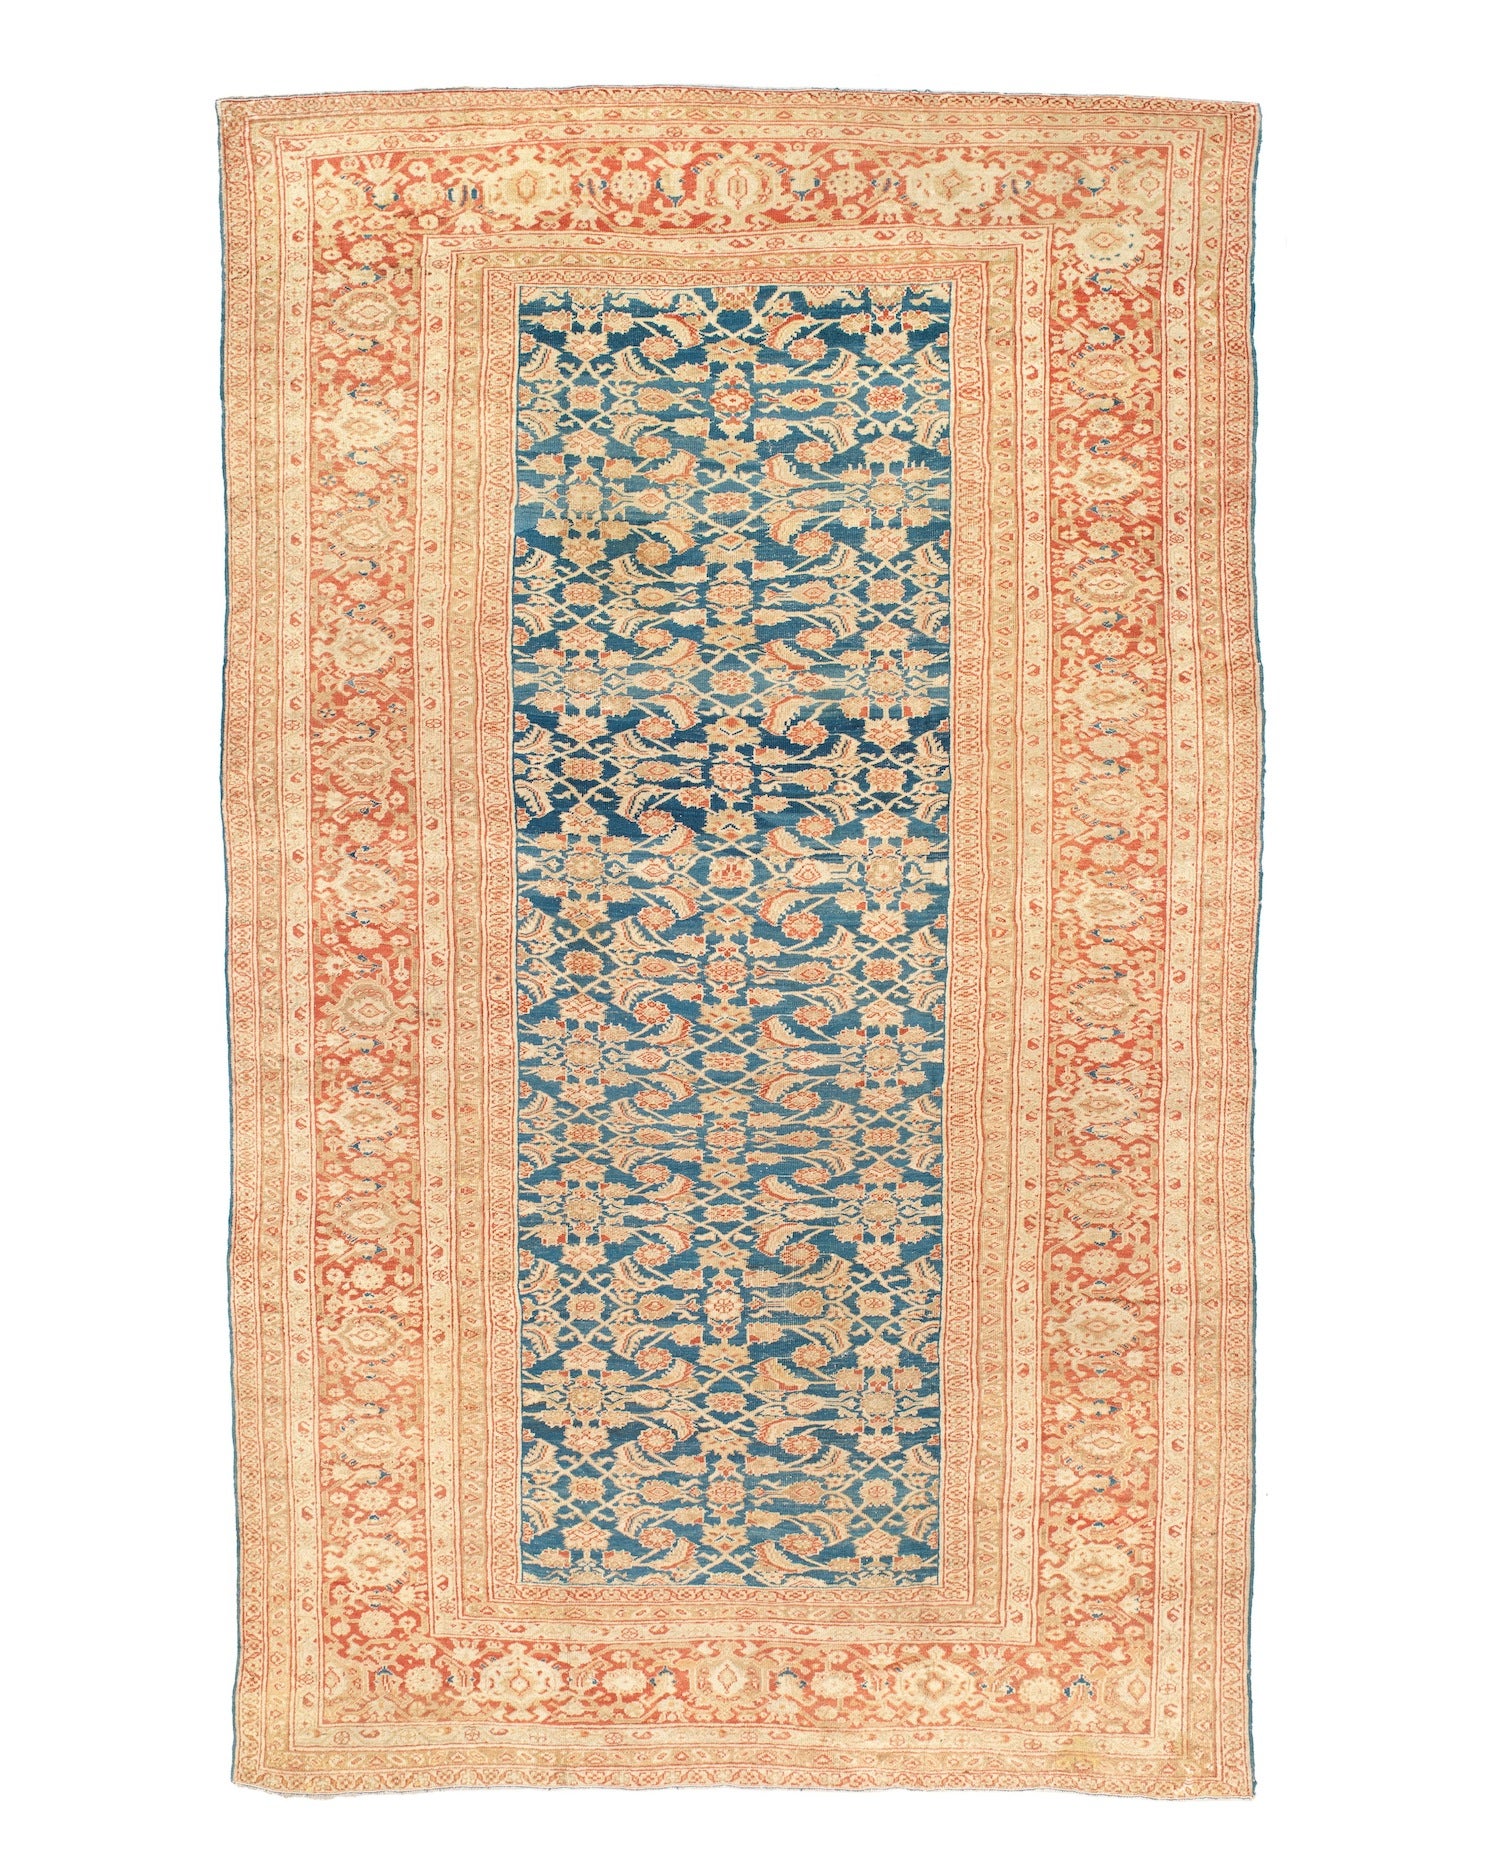 Late 19th Century Sultanabad Carpet with Light Blue Ground